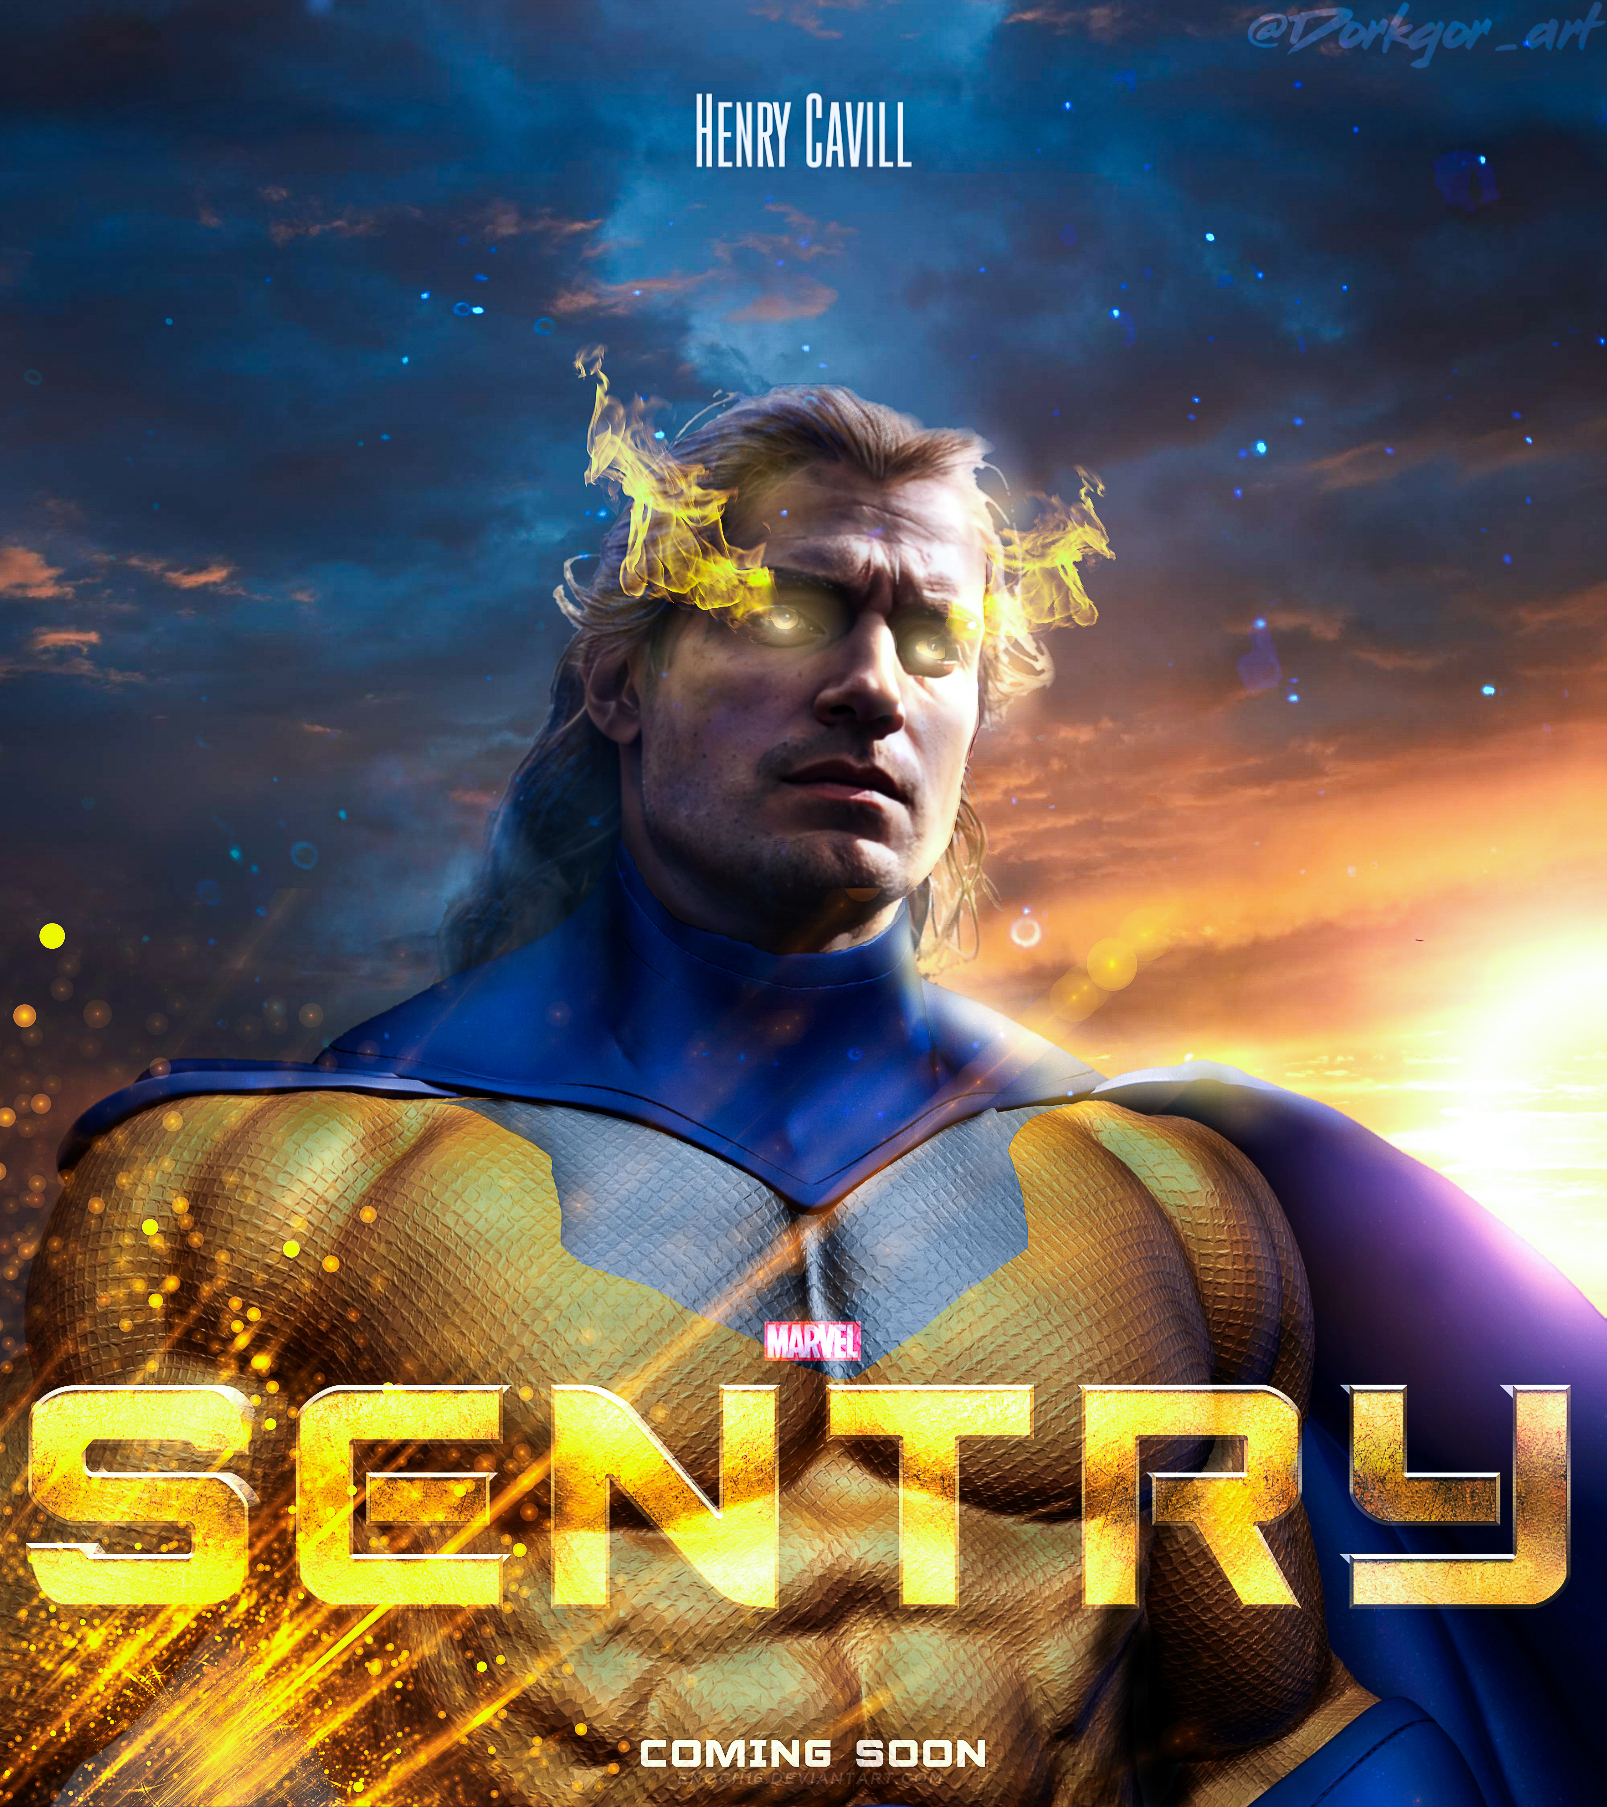 Henry cavill in the mcu at marvel plays sentry